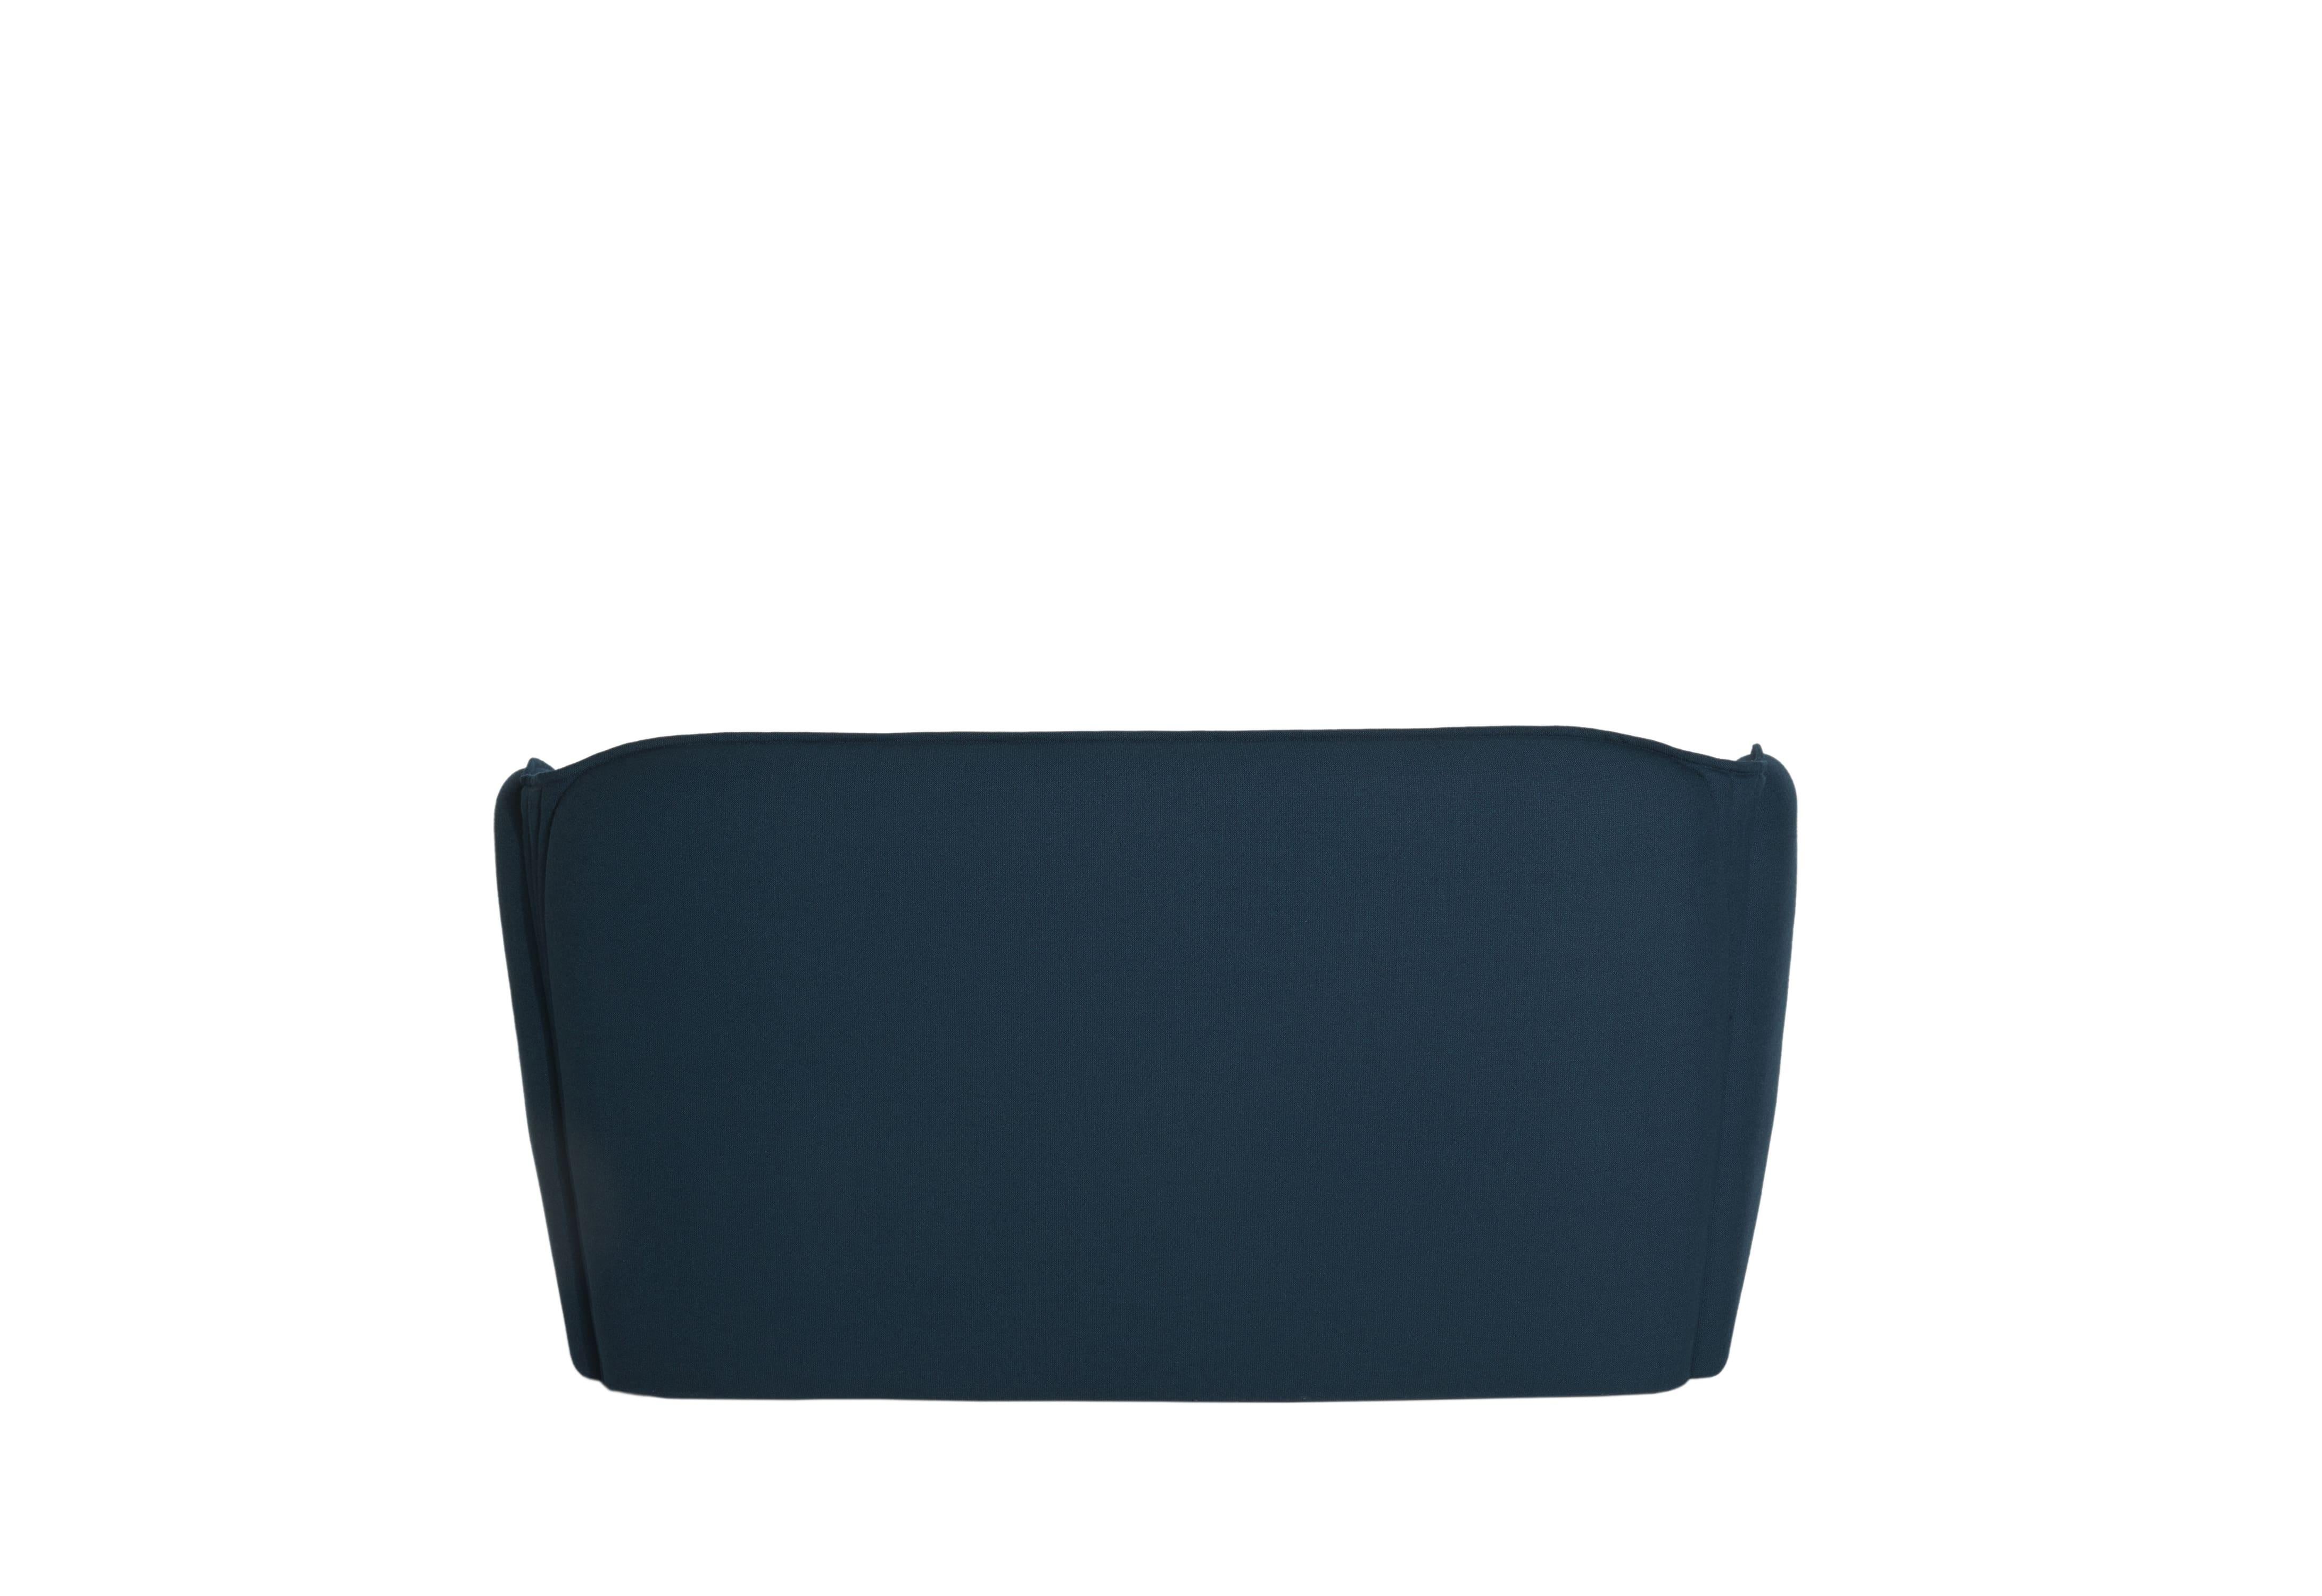 Petite Friture Lily Sofa in Navy Blue by Färg & Blanche, 2022 In New Condition For Sale In Brooklyn, NY